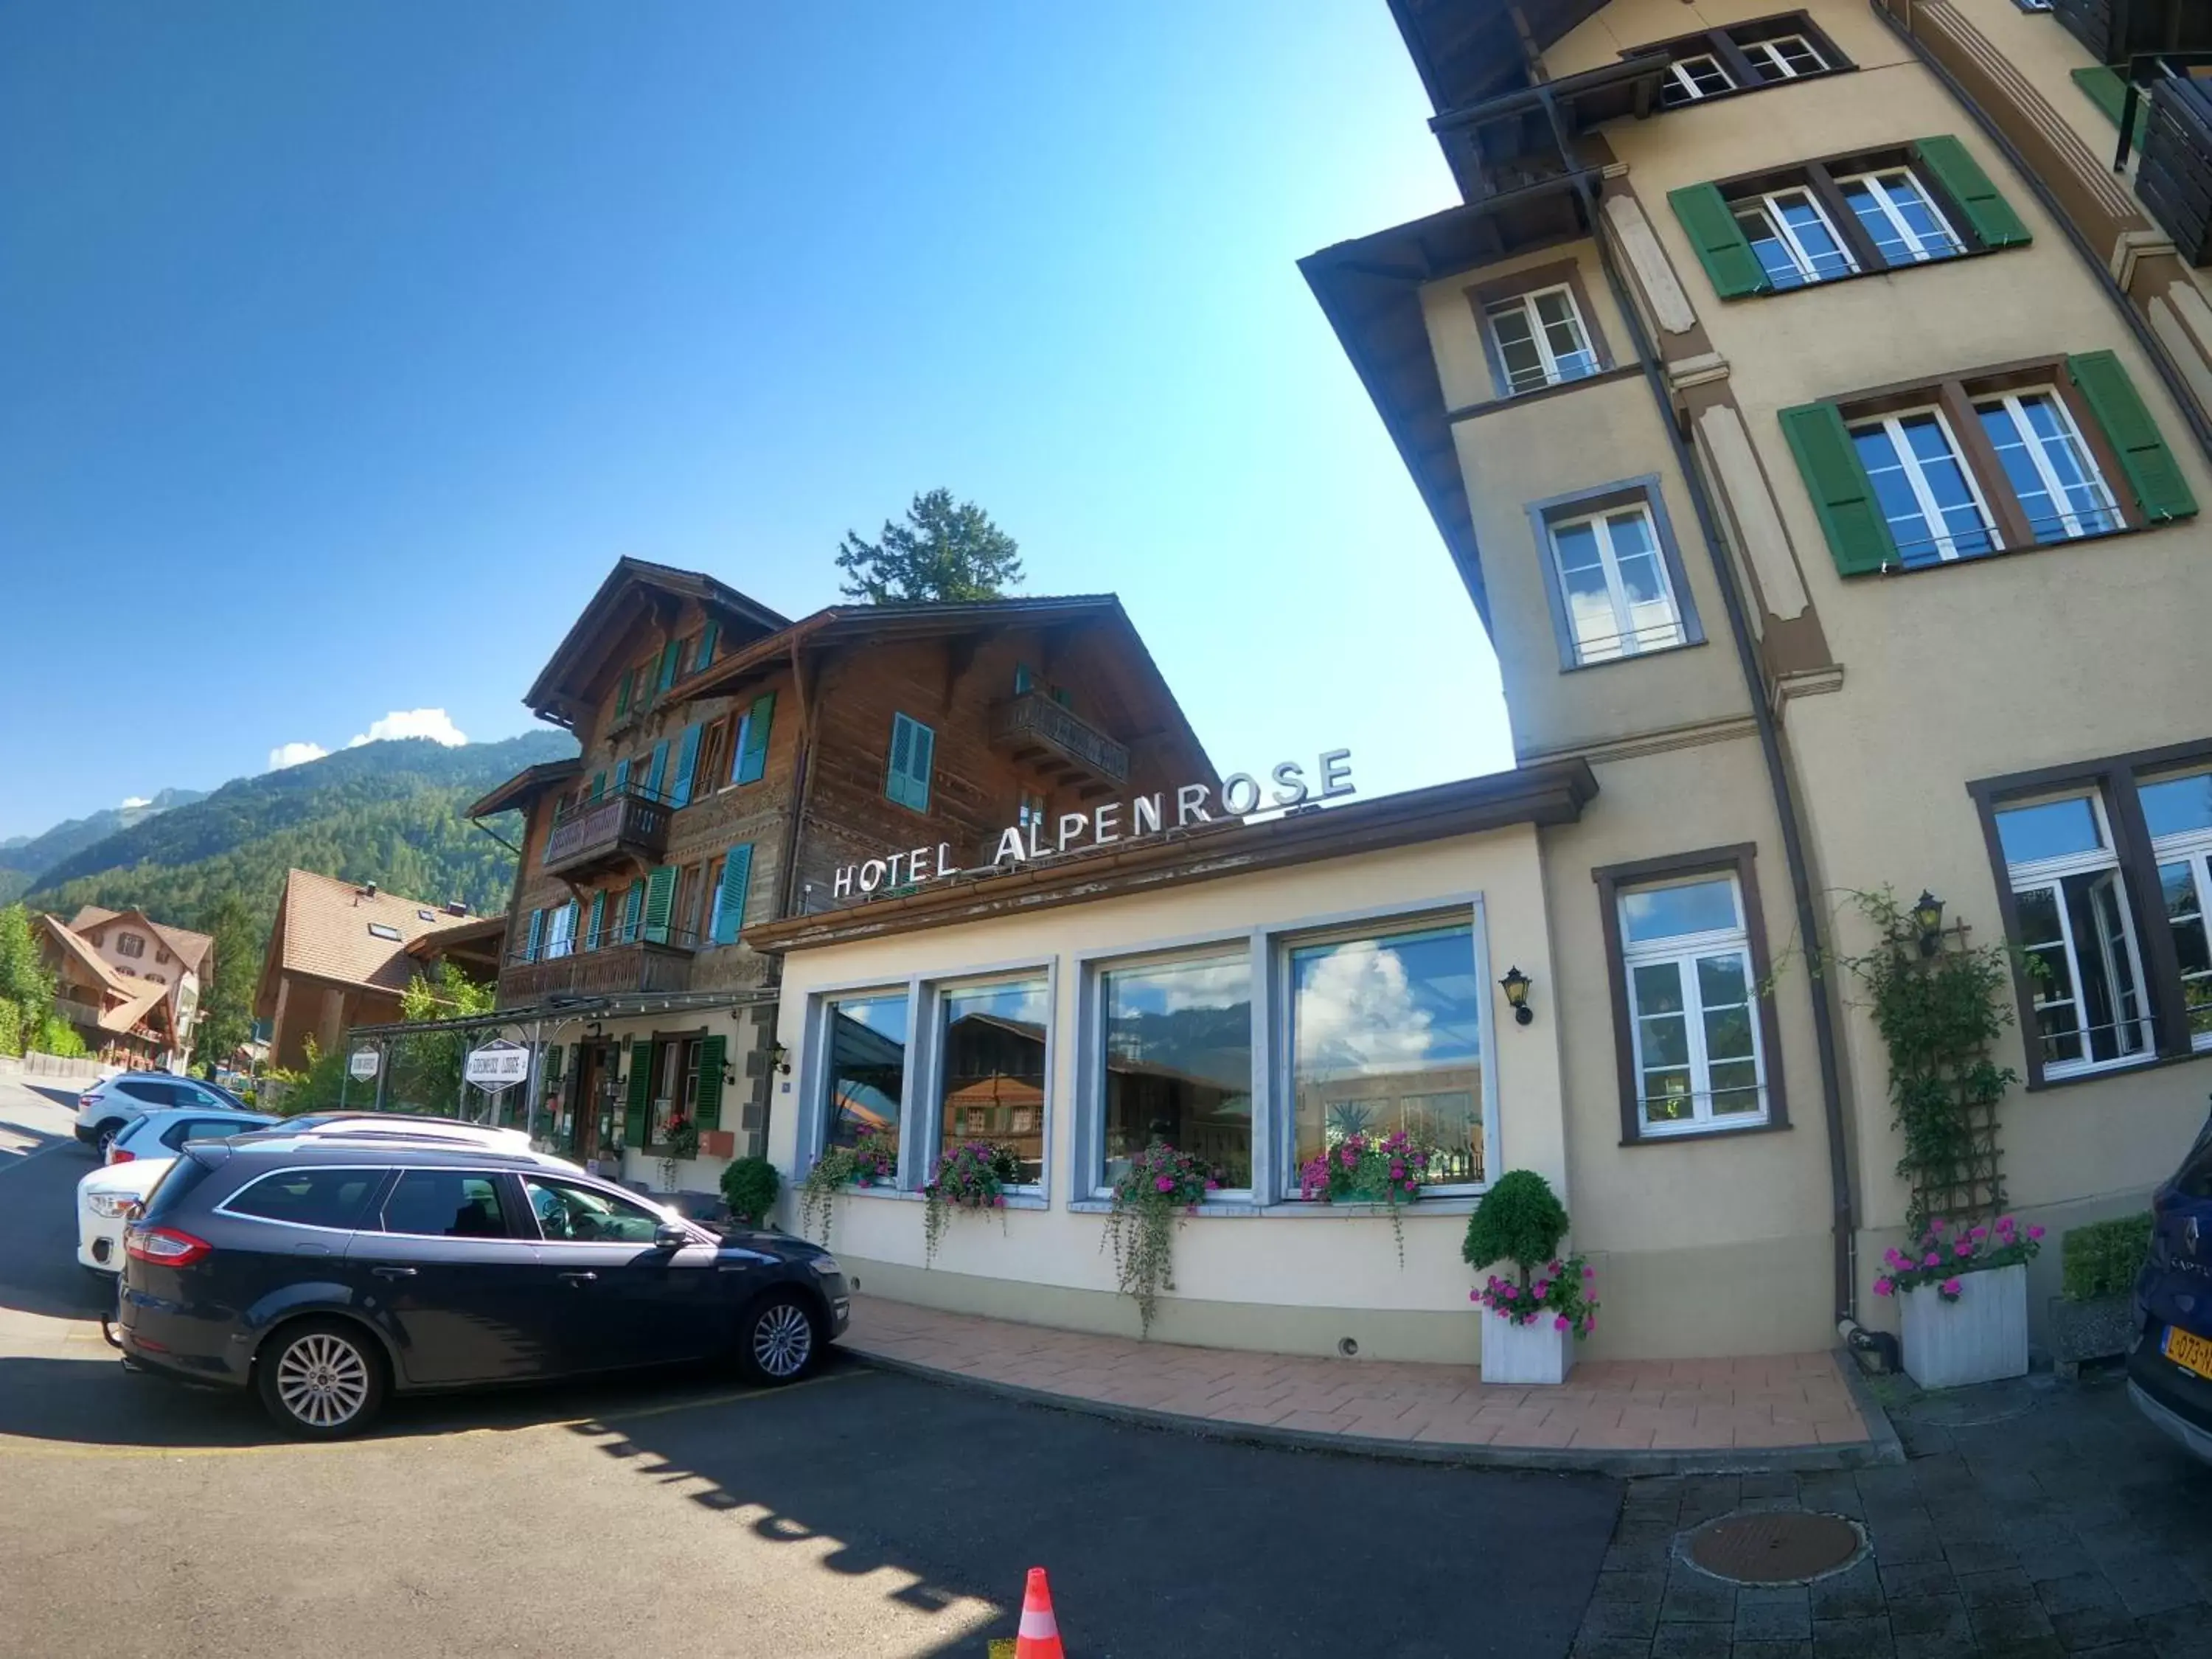 Parking, Property Building in Alpenrose Hotel and Gardens